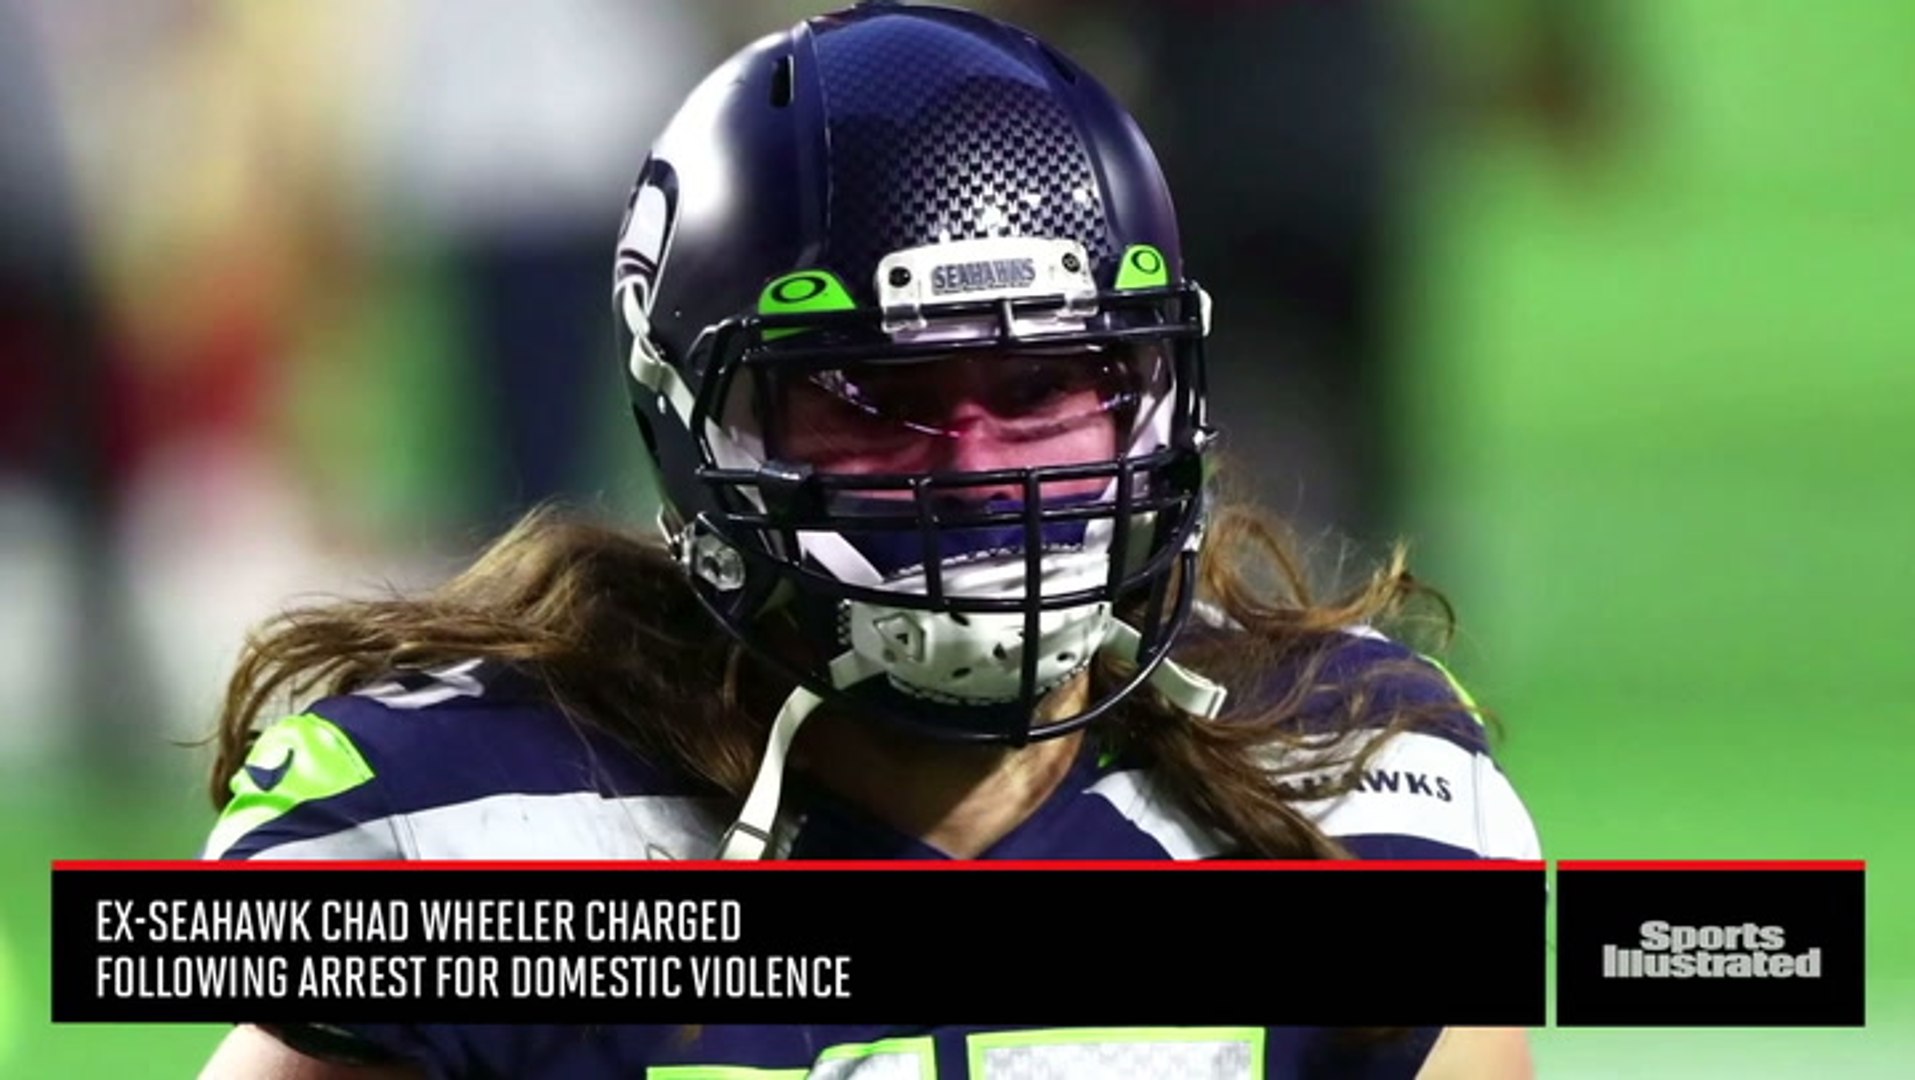 ⁣Ex-Seahawk Chad Wheeler Charged Following Arrest for Domestic Violence